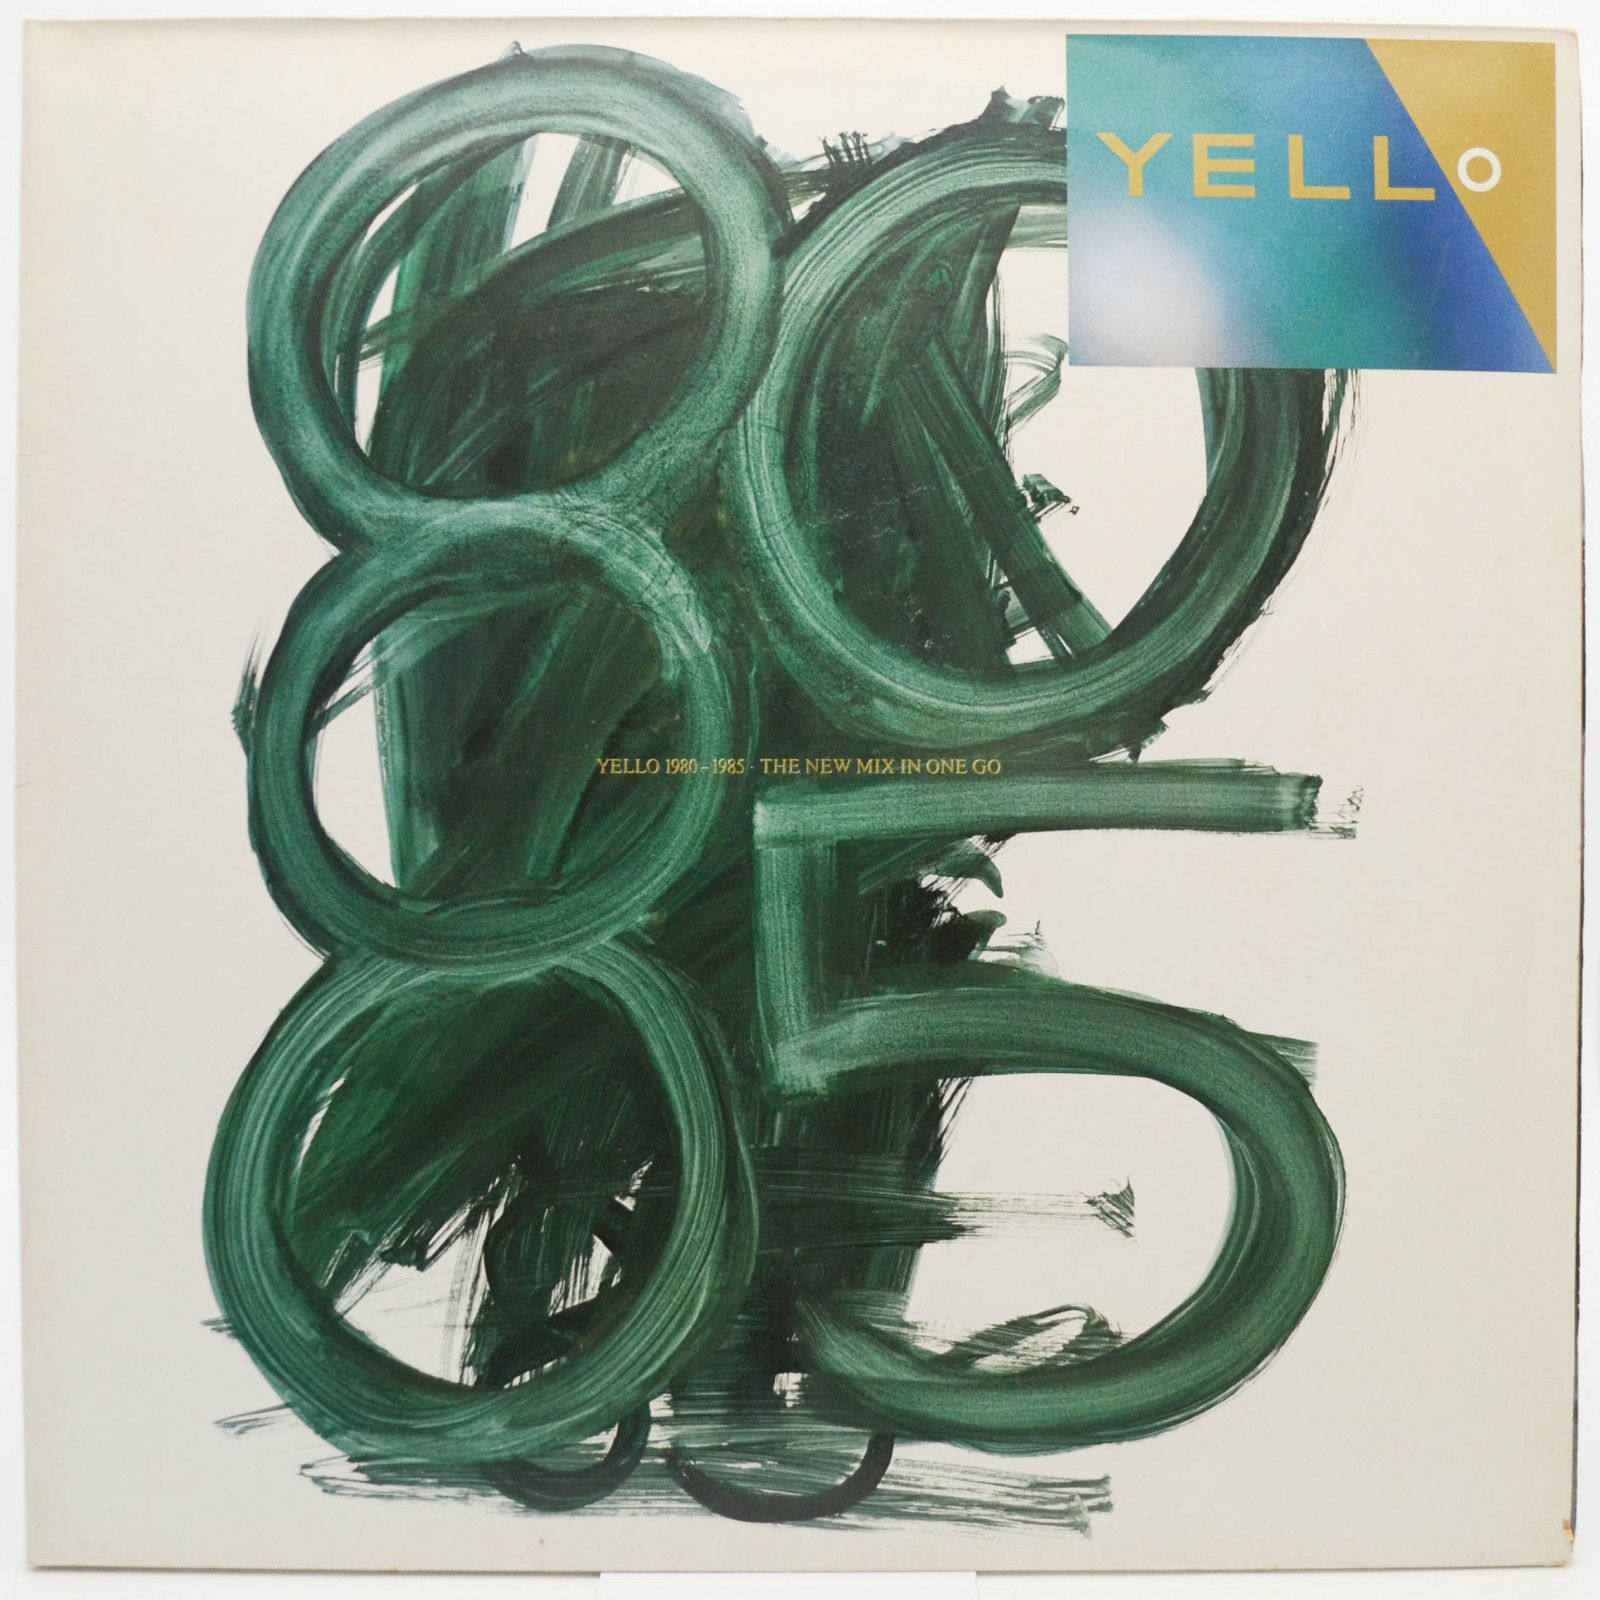 Yello — 1980 - 1985 The New Mix In One Go (2LP), 1986